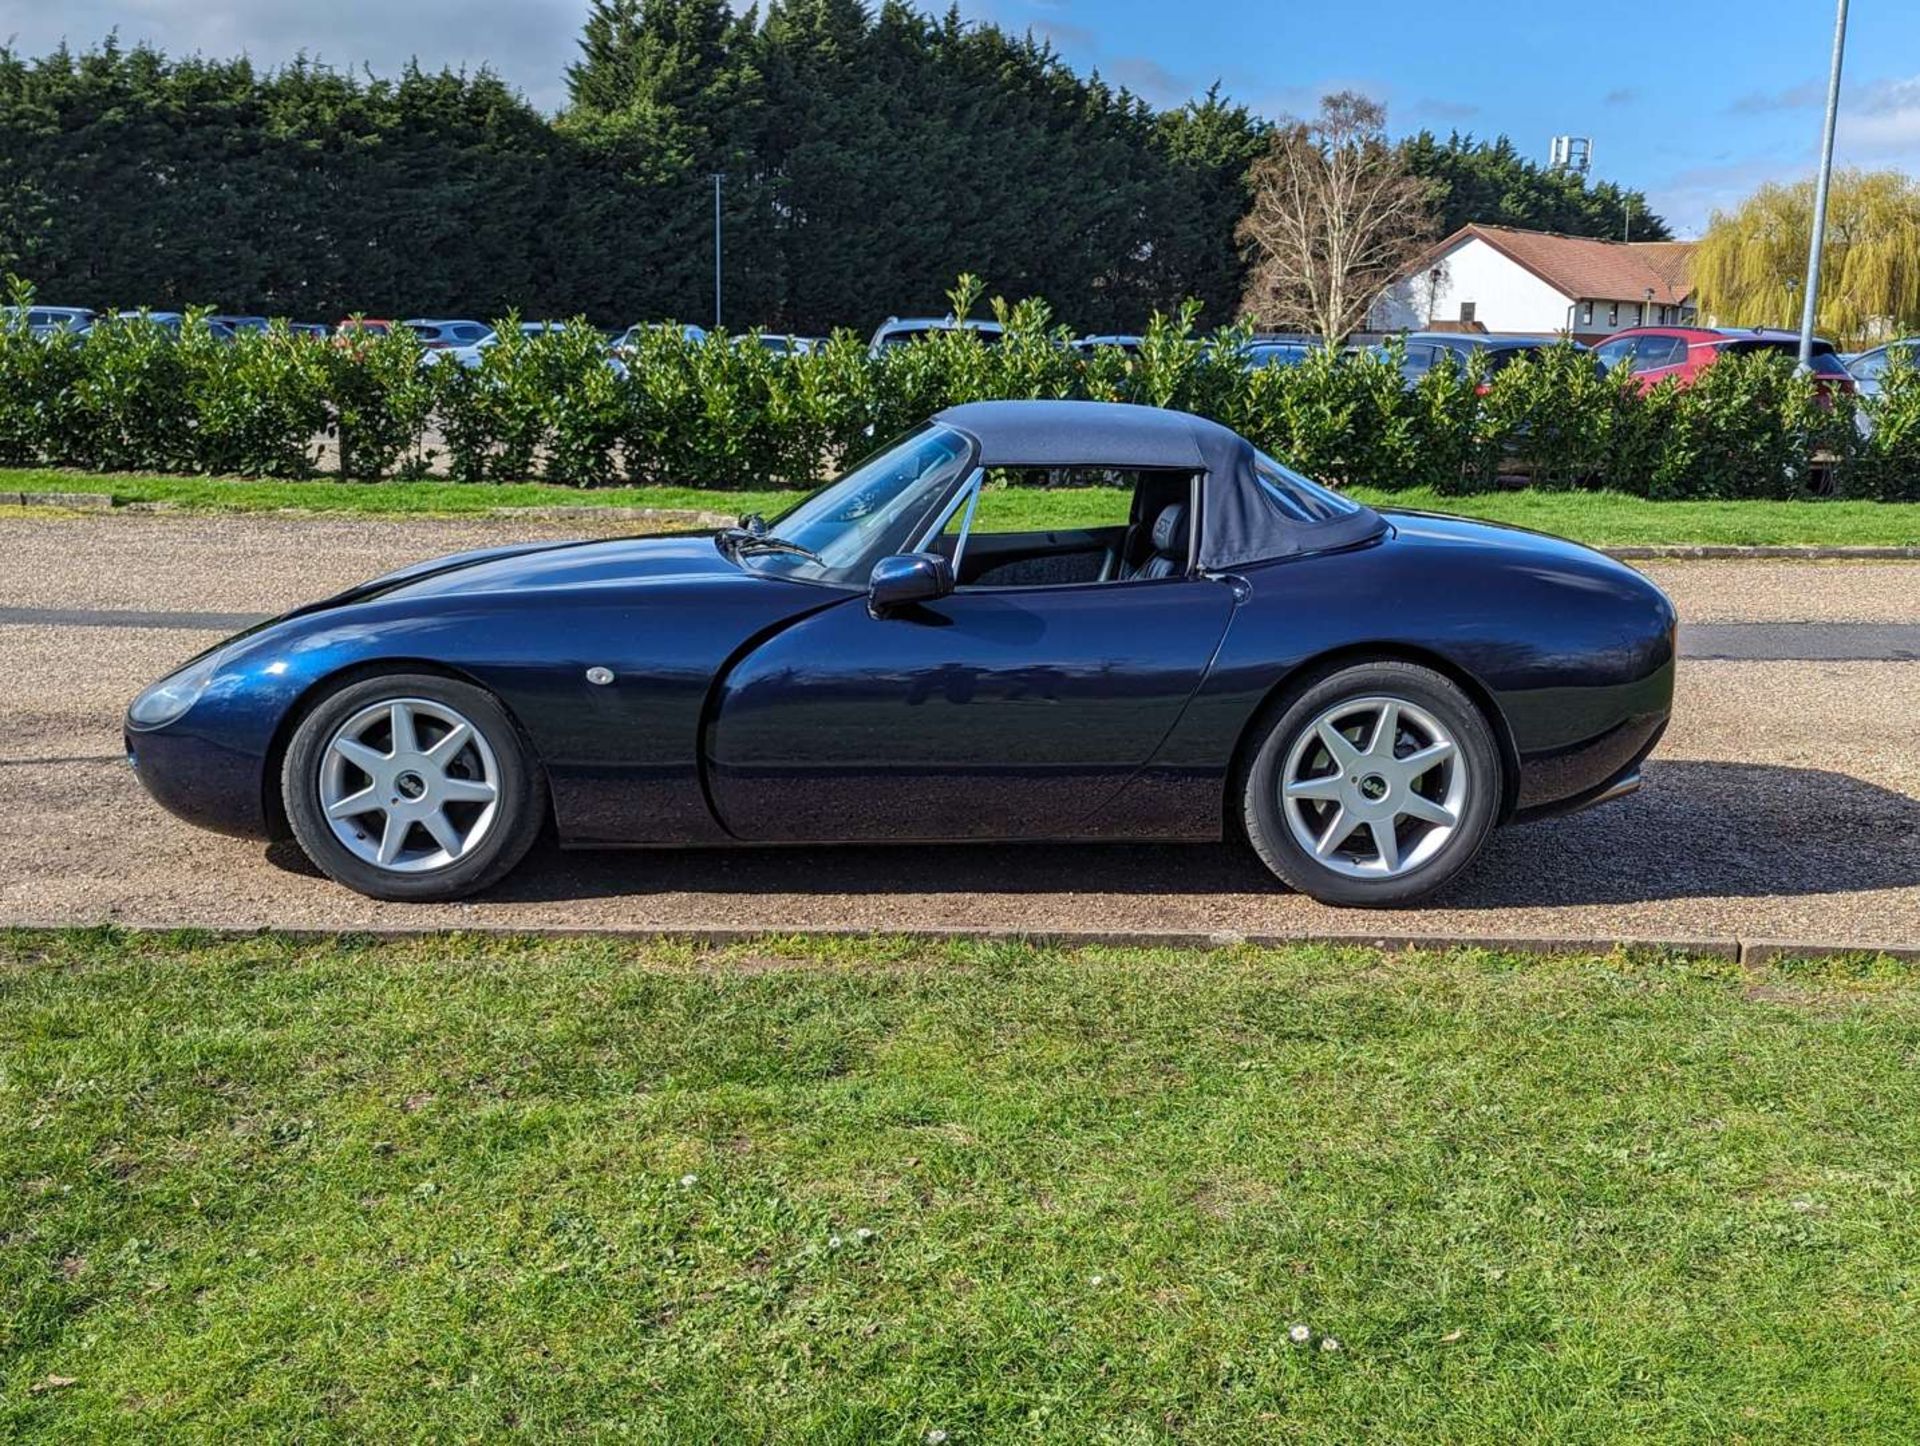 1997 TVR GRIFFITH 5.0 - Image 5 of 29